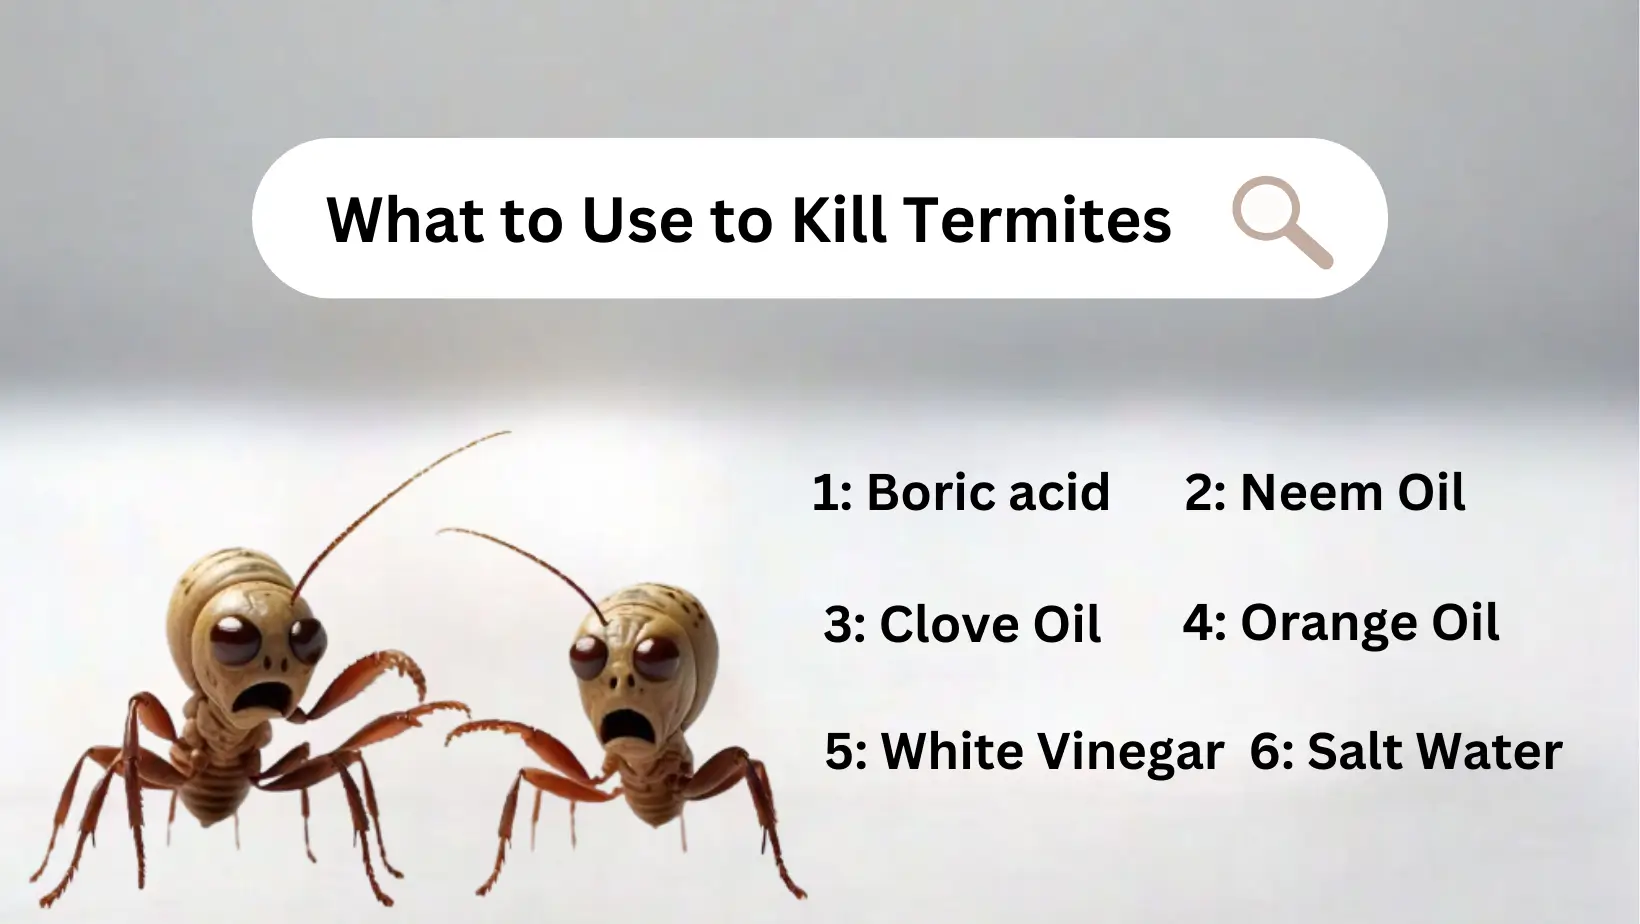 What to Use to Kill Termites